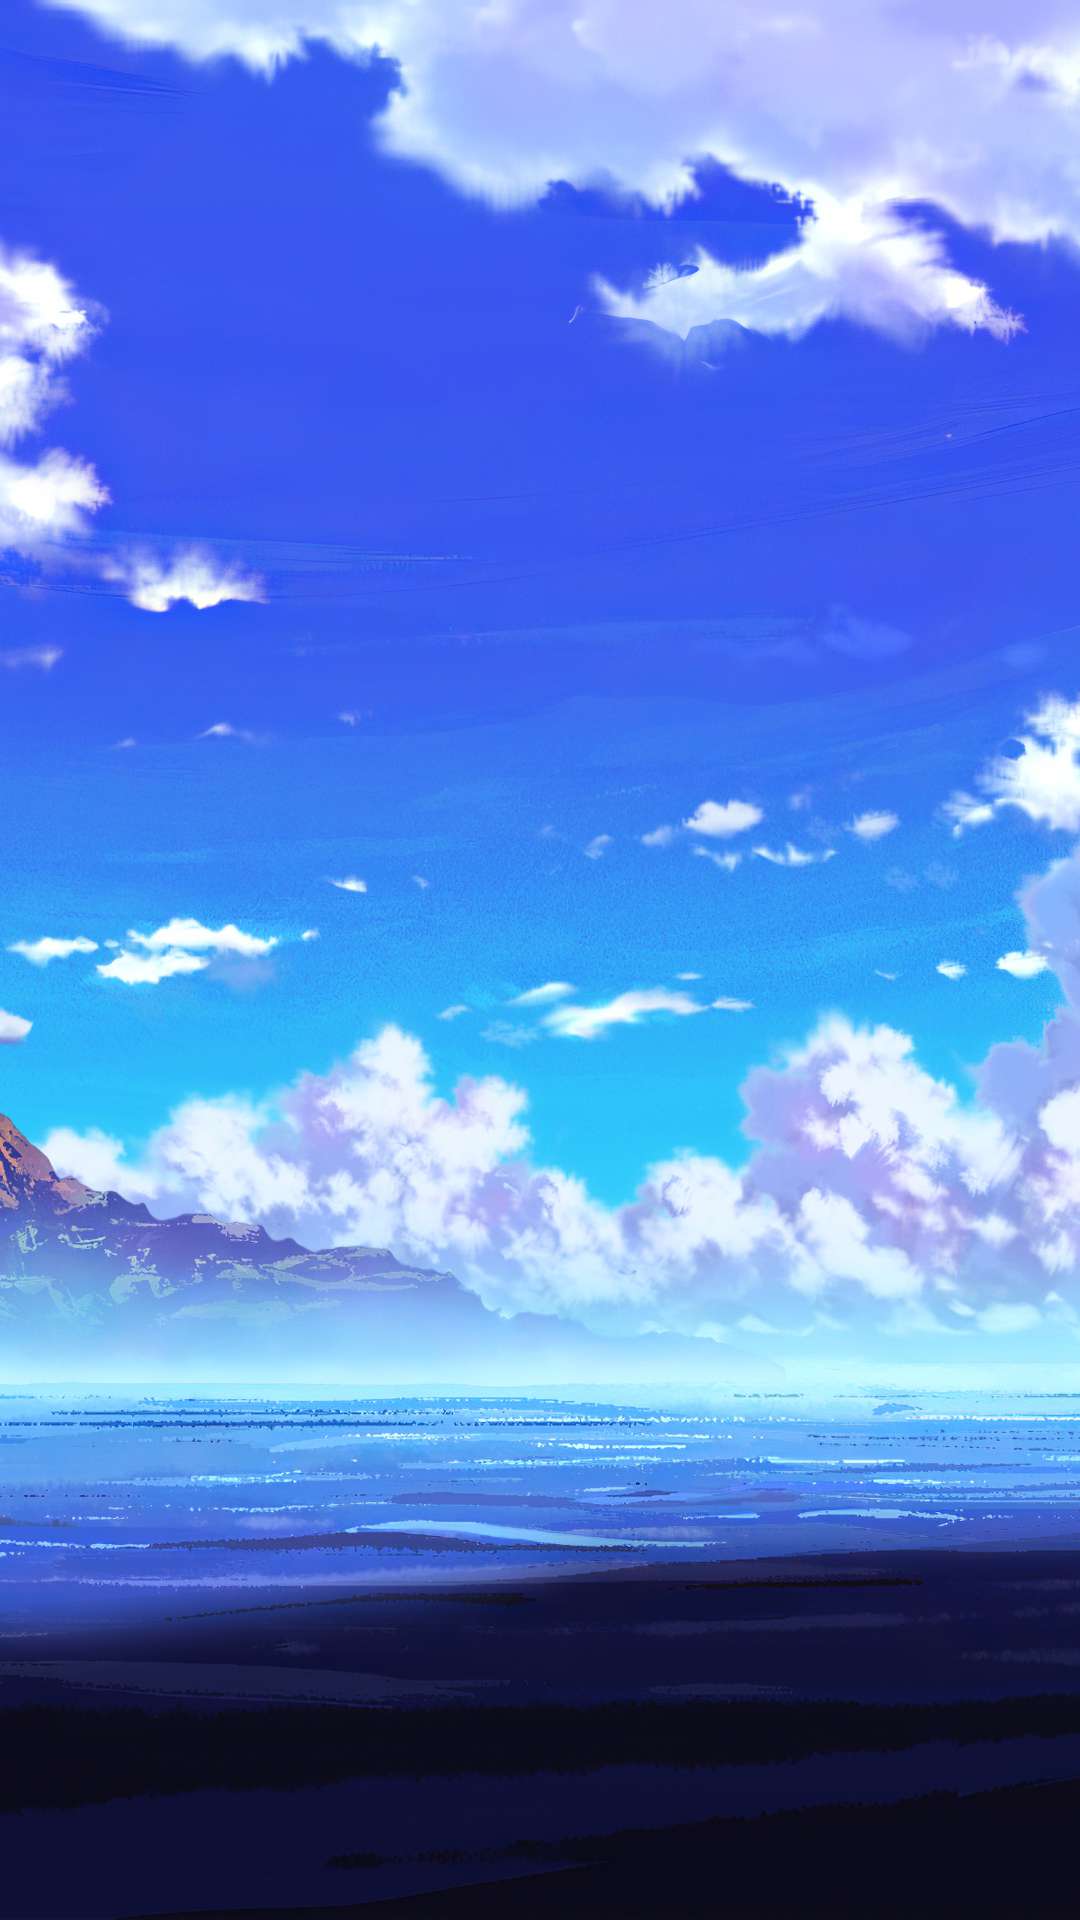 4k Anime Scenery Mobile Wallpapers - Wallpaper Cave